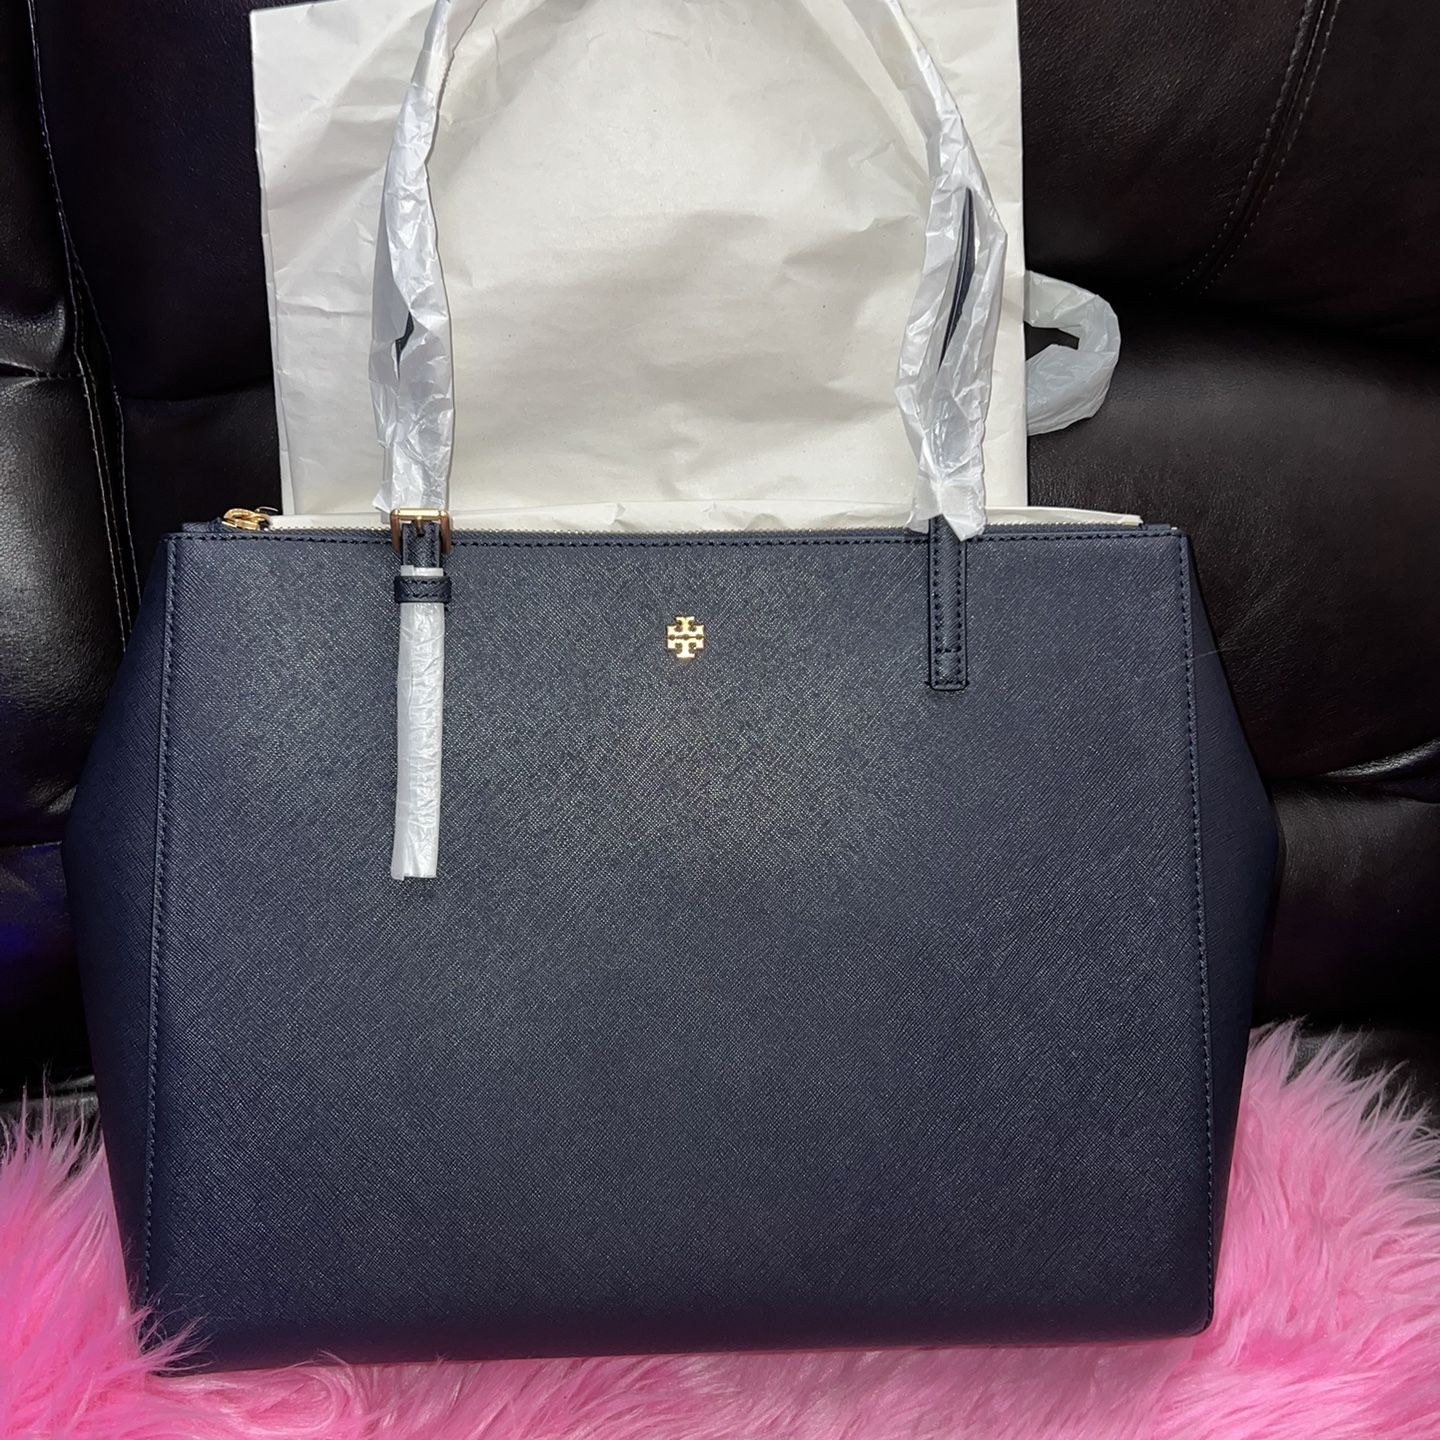 Tory Burch Ever Ready Tote Bag for Sale in Mcallen, TX - OfferUp